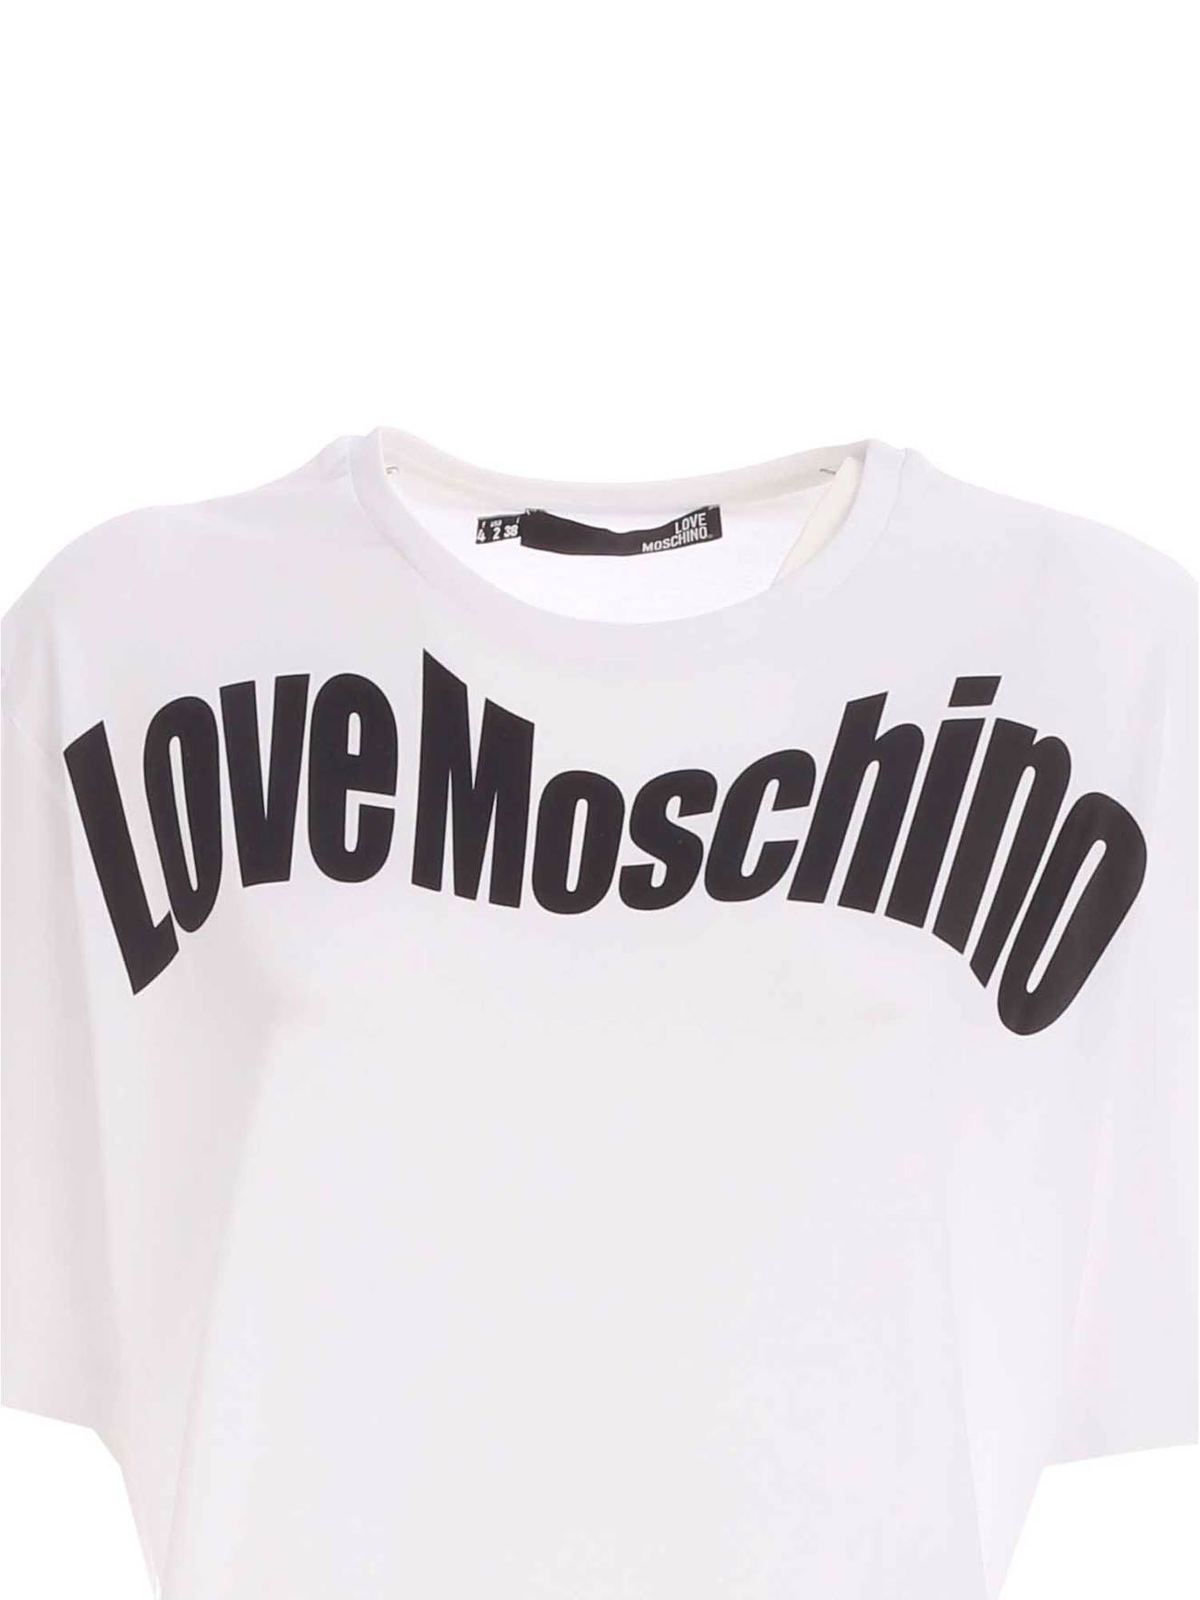 give me love moschino t shirt